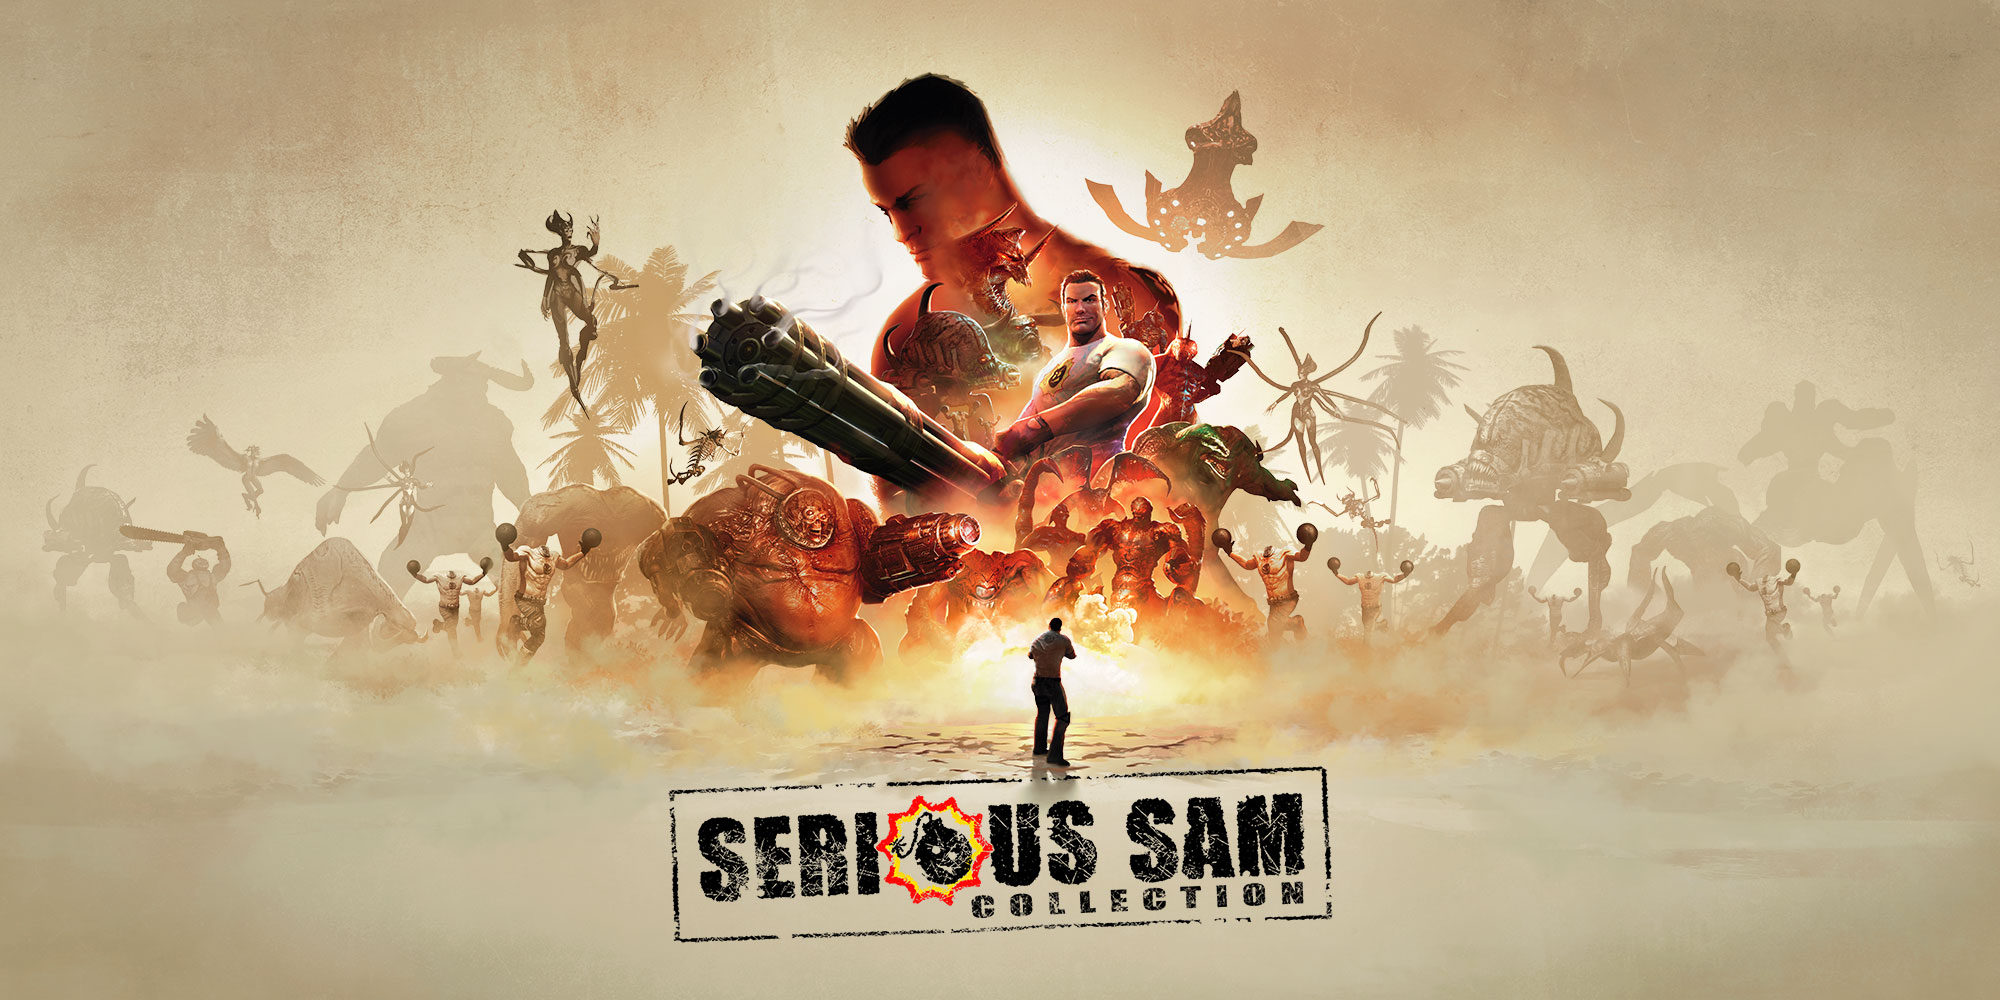 Serious Sam Collection | Nintendo Switch download software | Games 